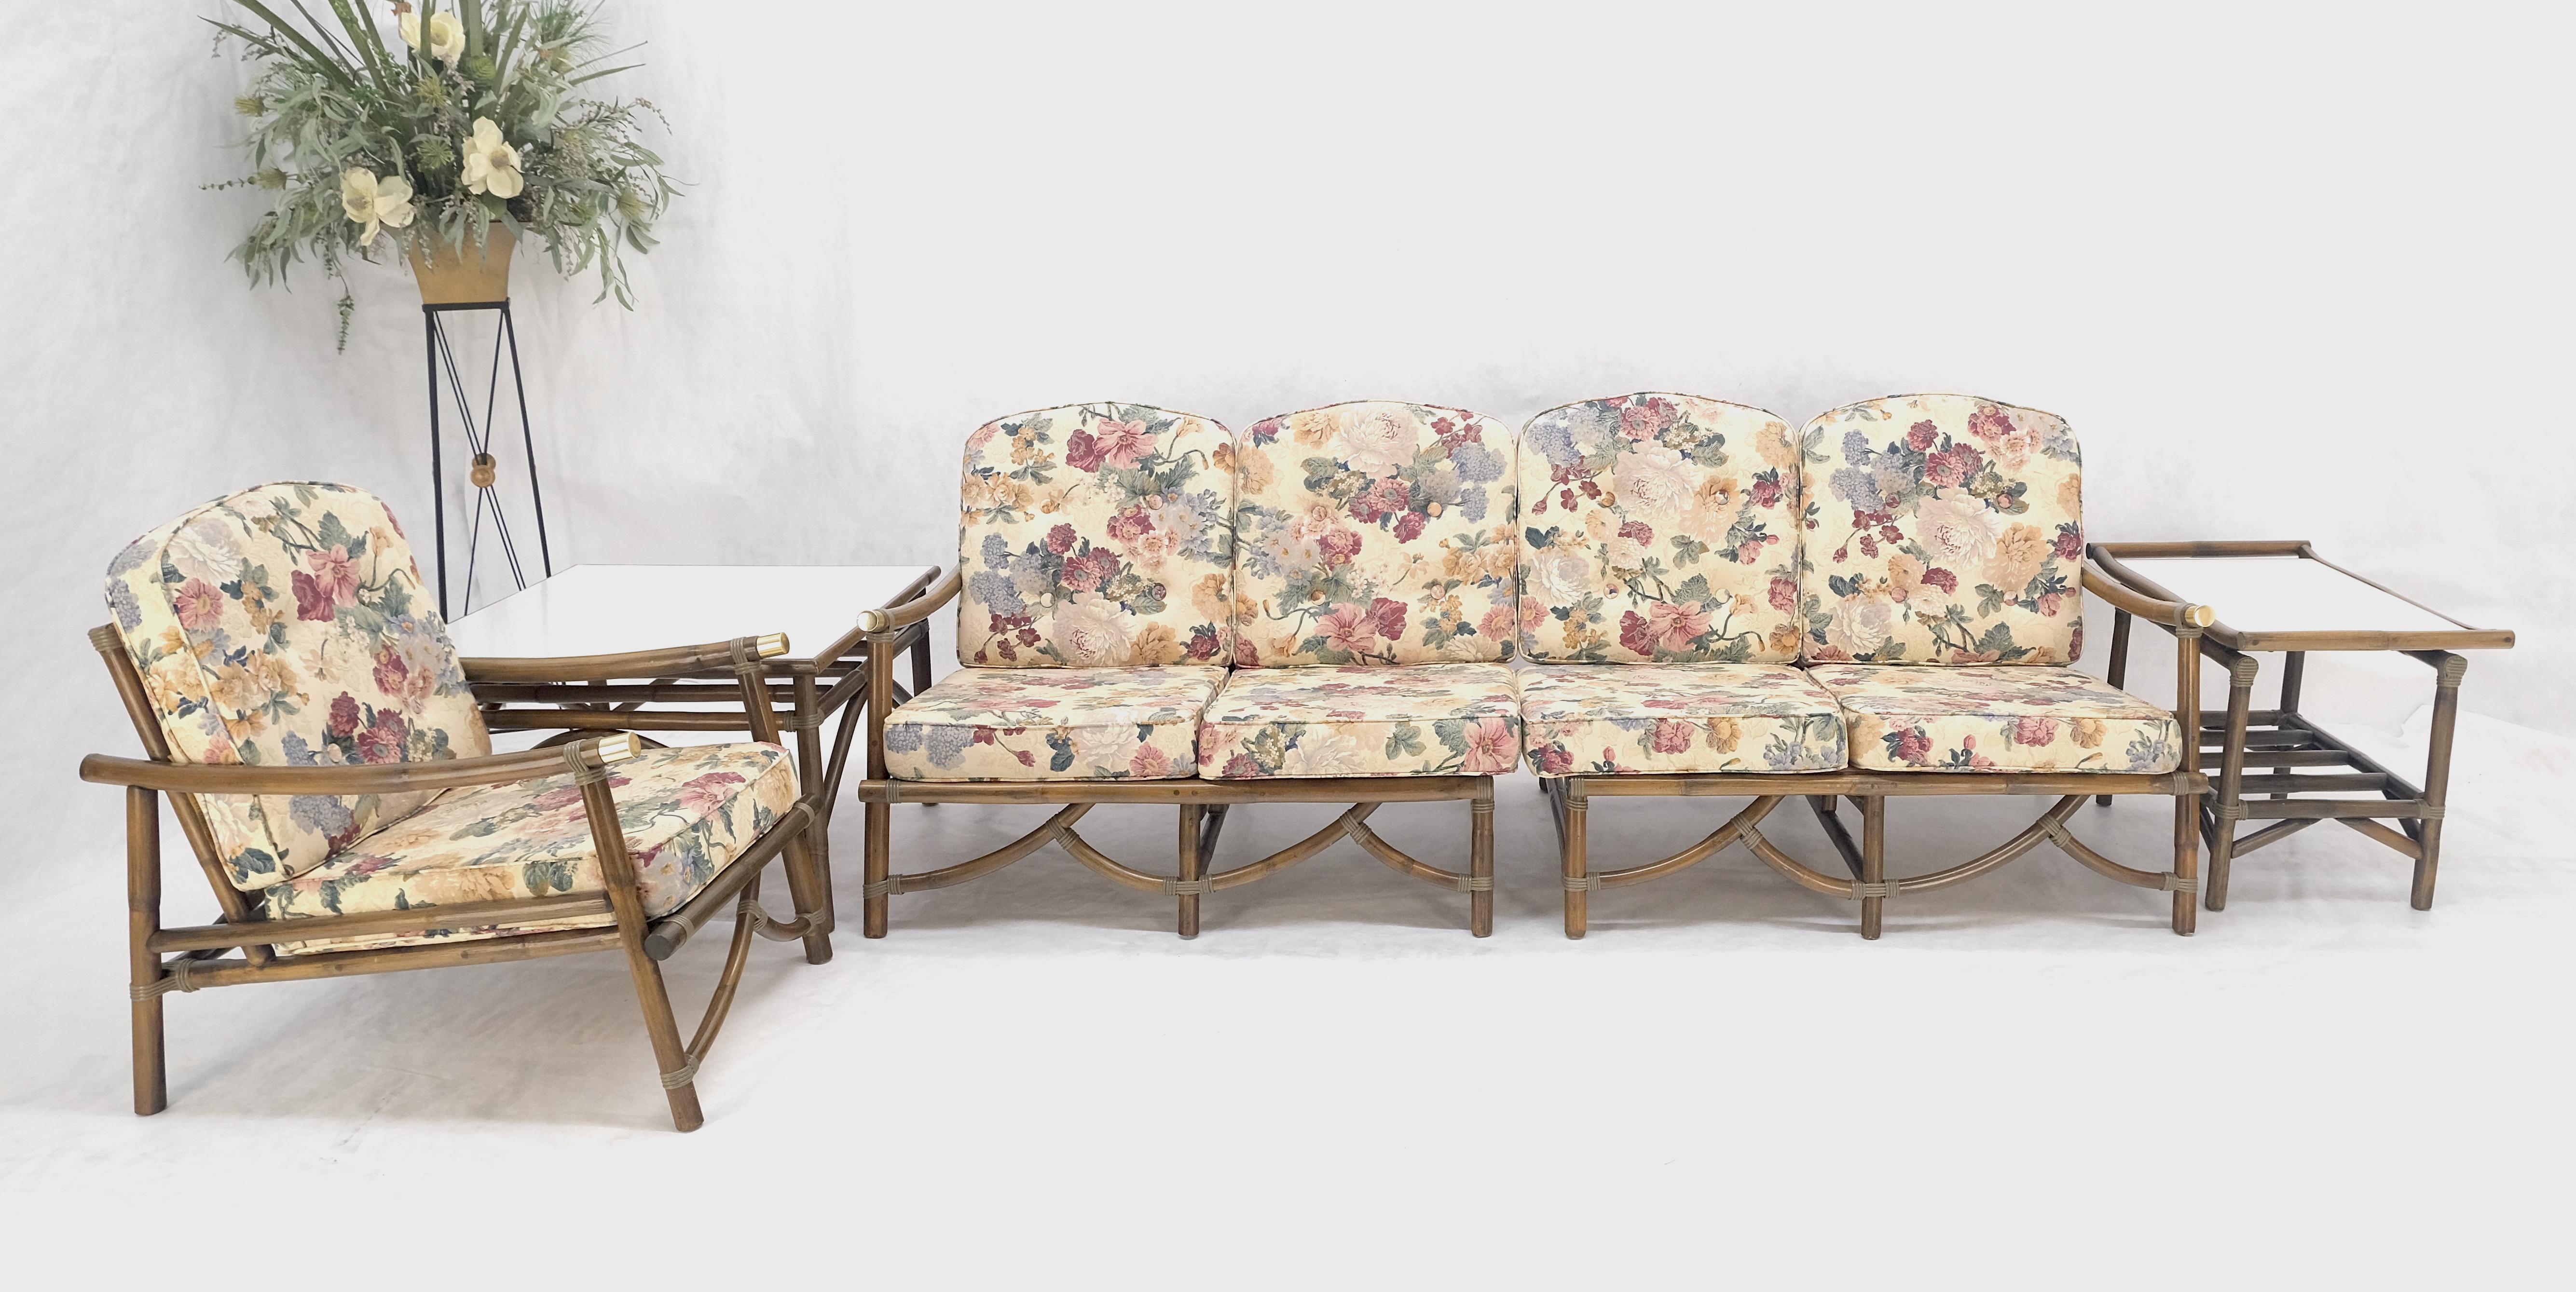 Mid-Century Modern Vogue Rattan Bamboo c1970s Sofa Matching Chair Pair of End Tables 5 Pcs Set Mint For Sale